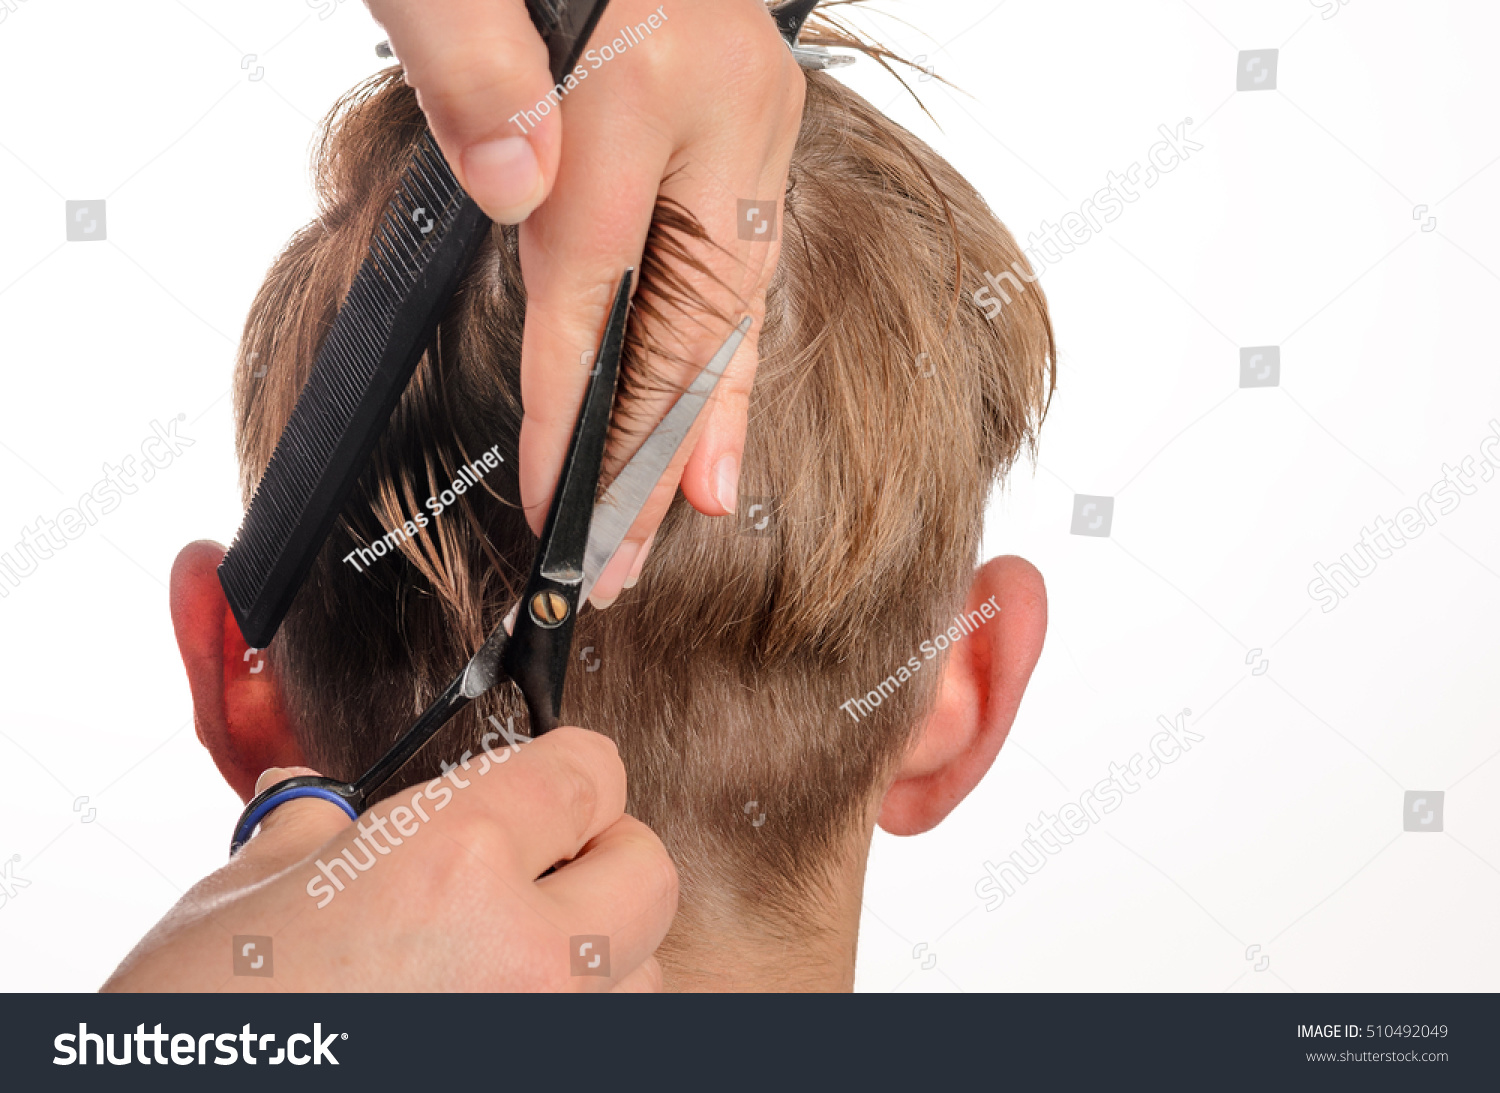 Young Men Professional Barber Hair Saloon Stock Photo 510492049